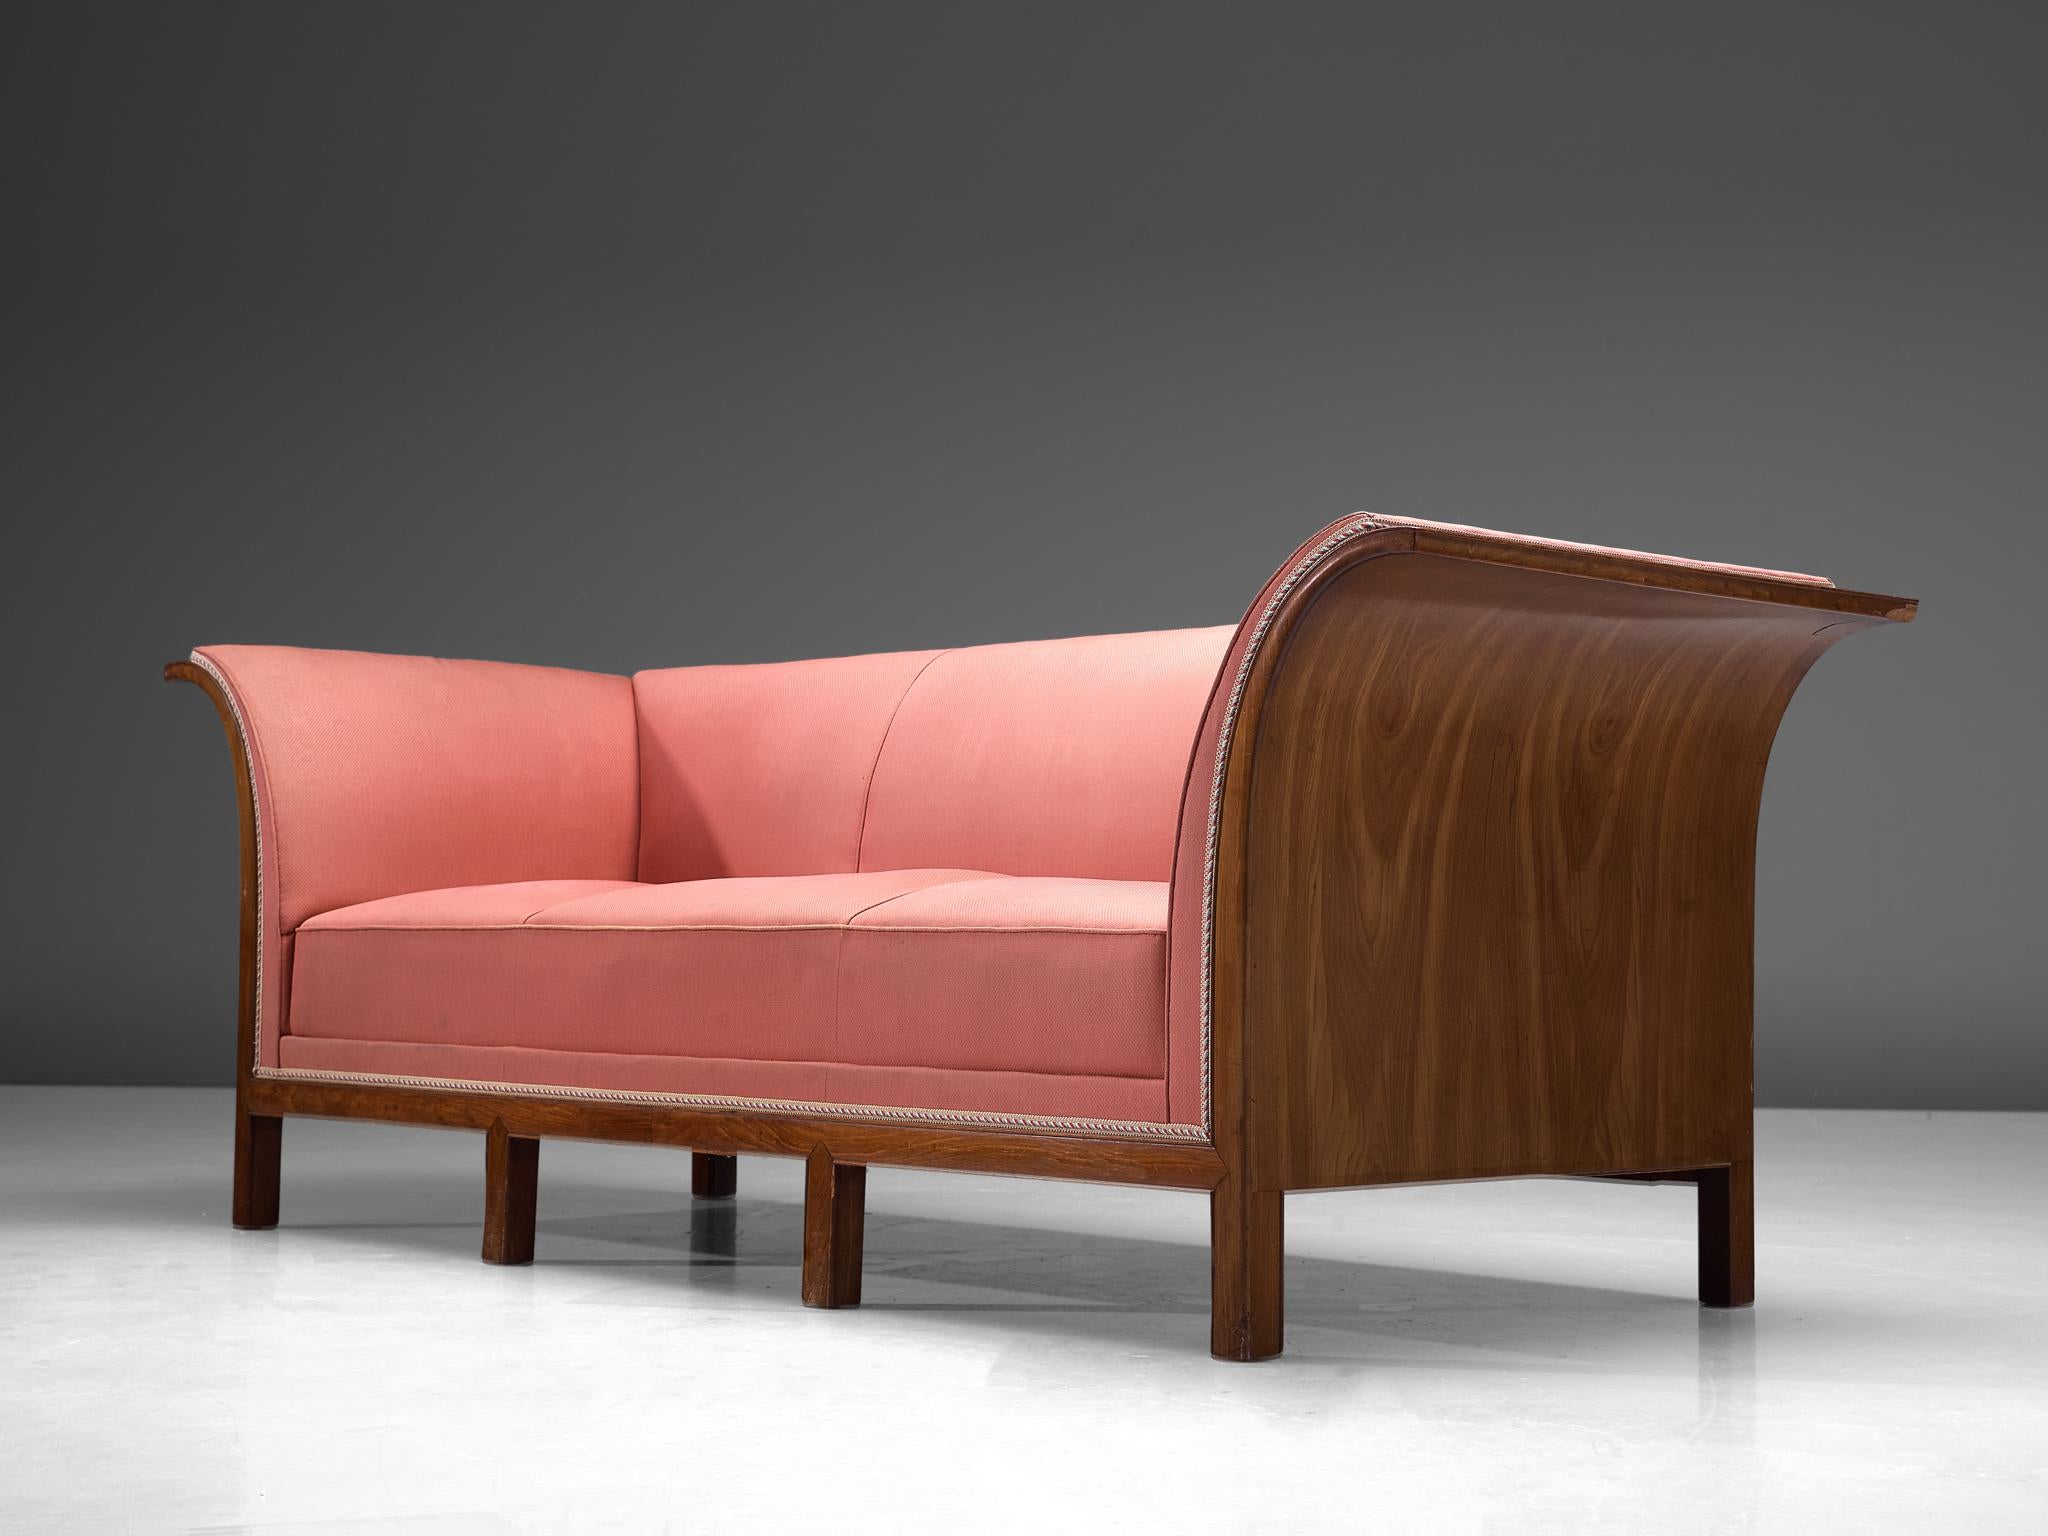 Scandinavian Modern Frits Henningsen Sofa in Mahogany and Pink Upholstery For Sale